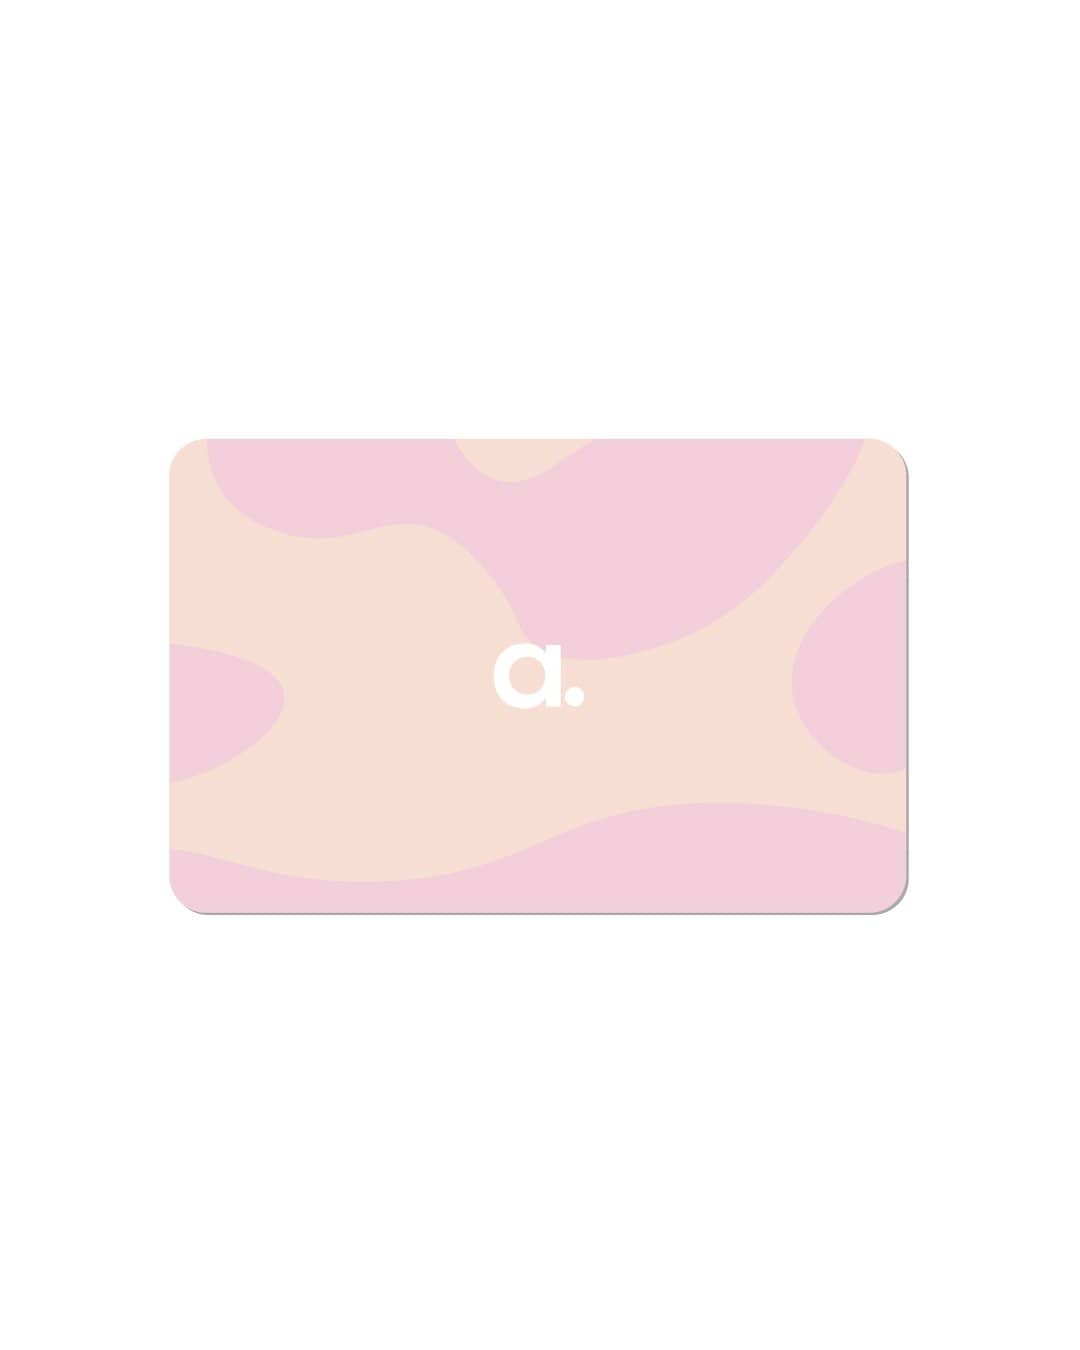 Digital gift card. Gift a babe! Choose your amount. Anese